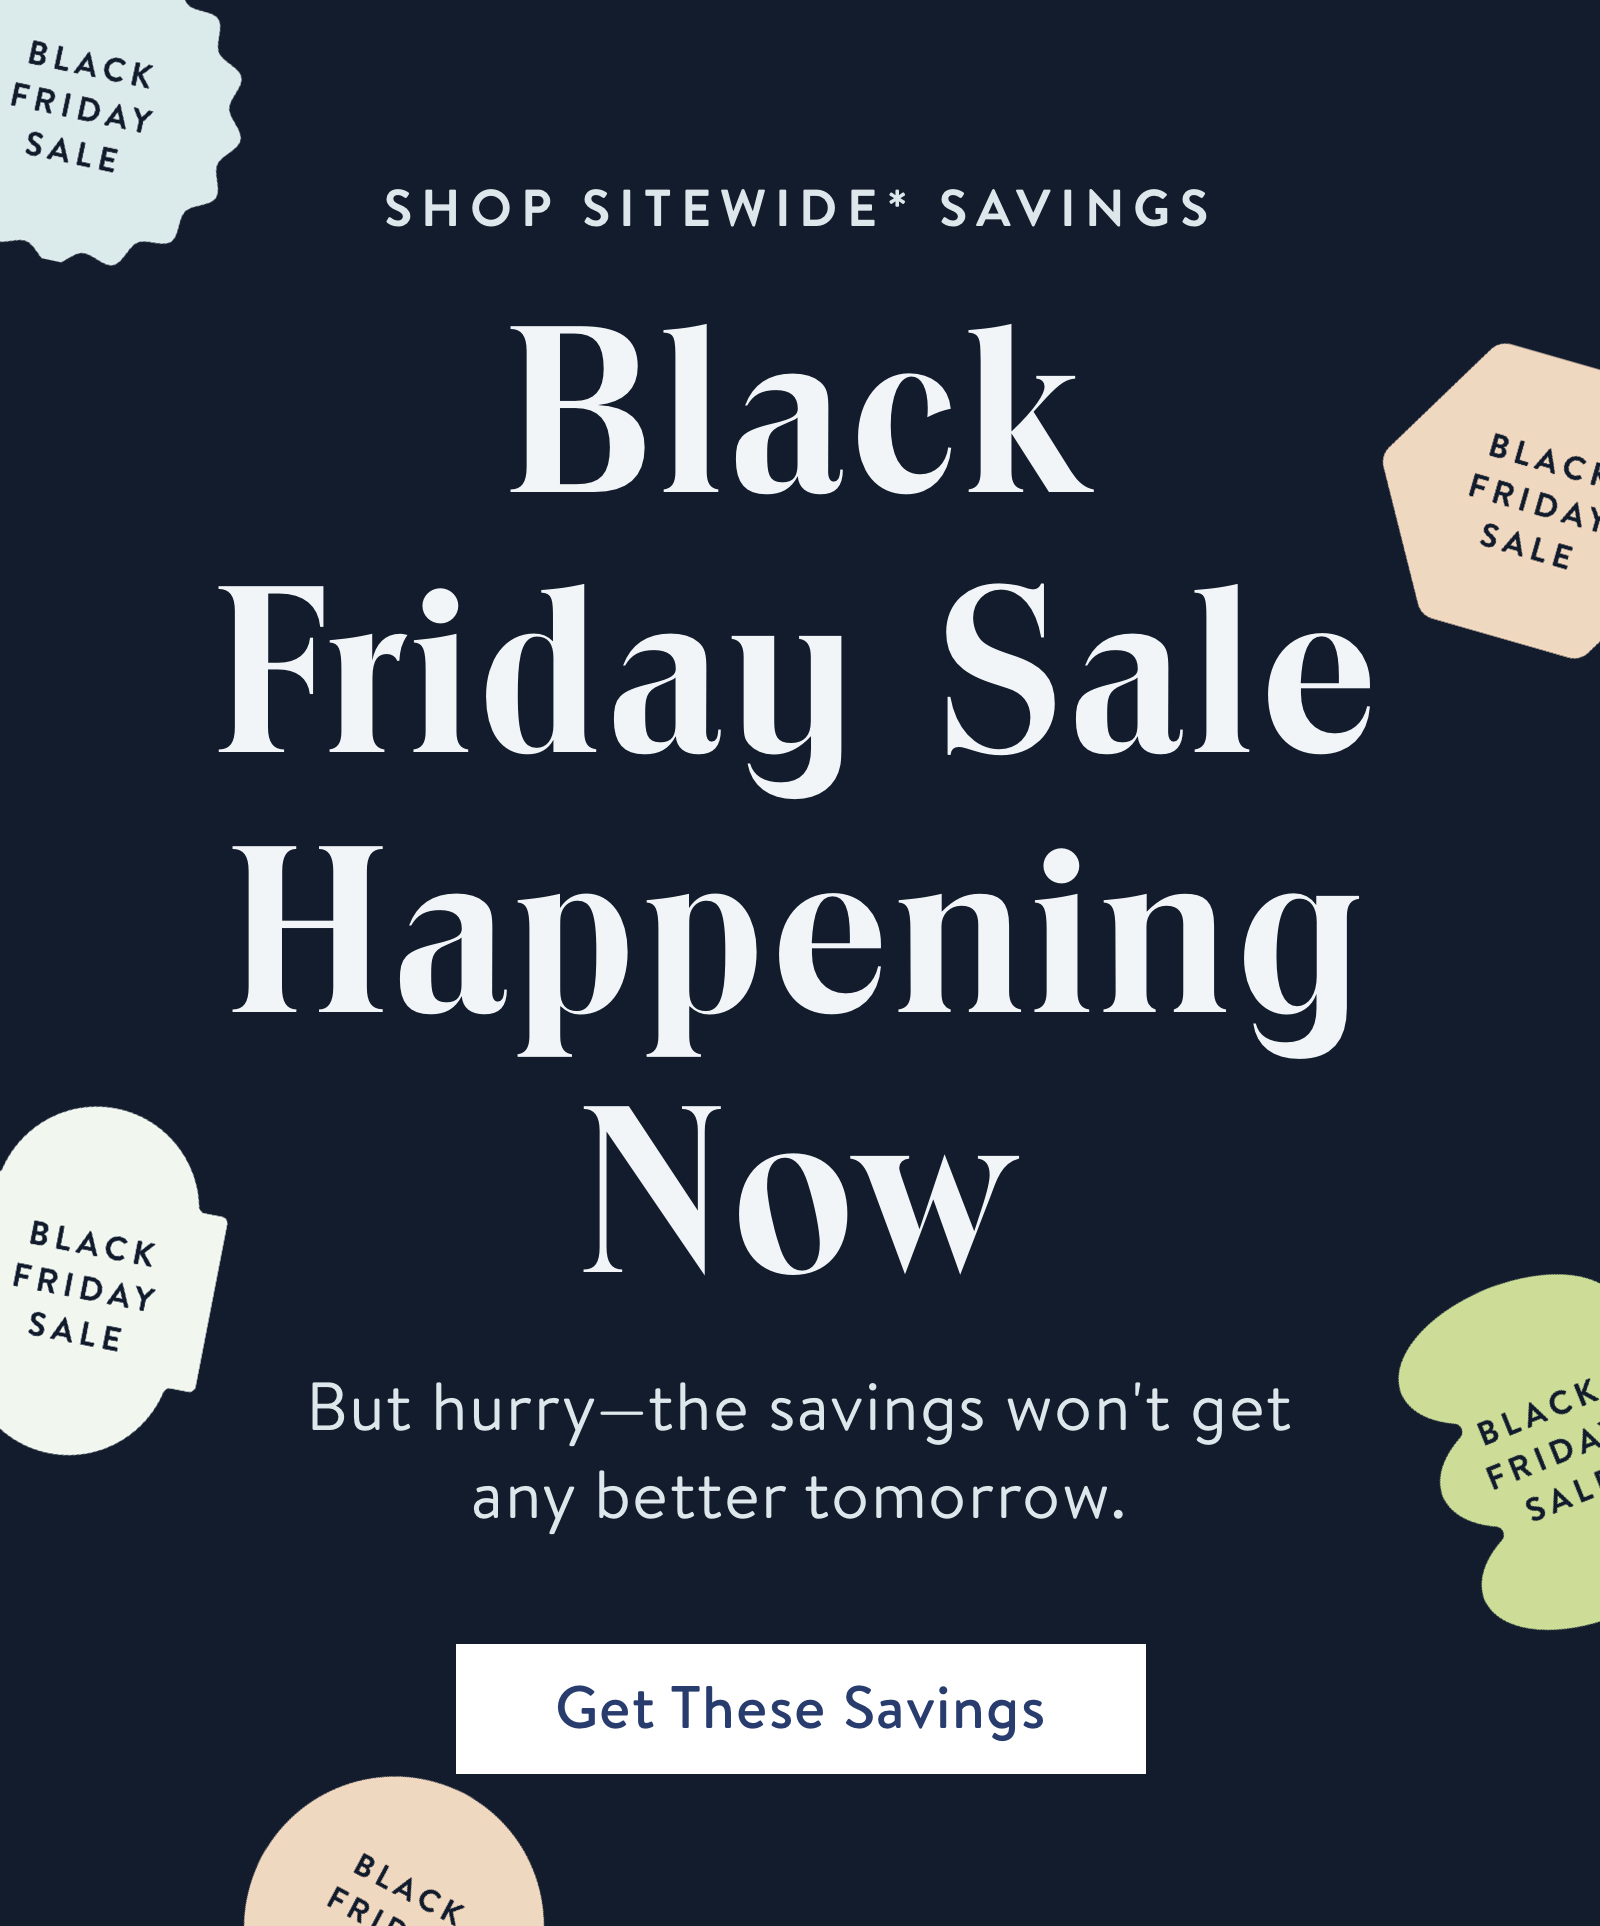 Save Big This Black Friday! But Hurry, the savings won''t get any better tomorrow.